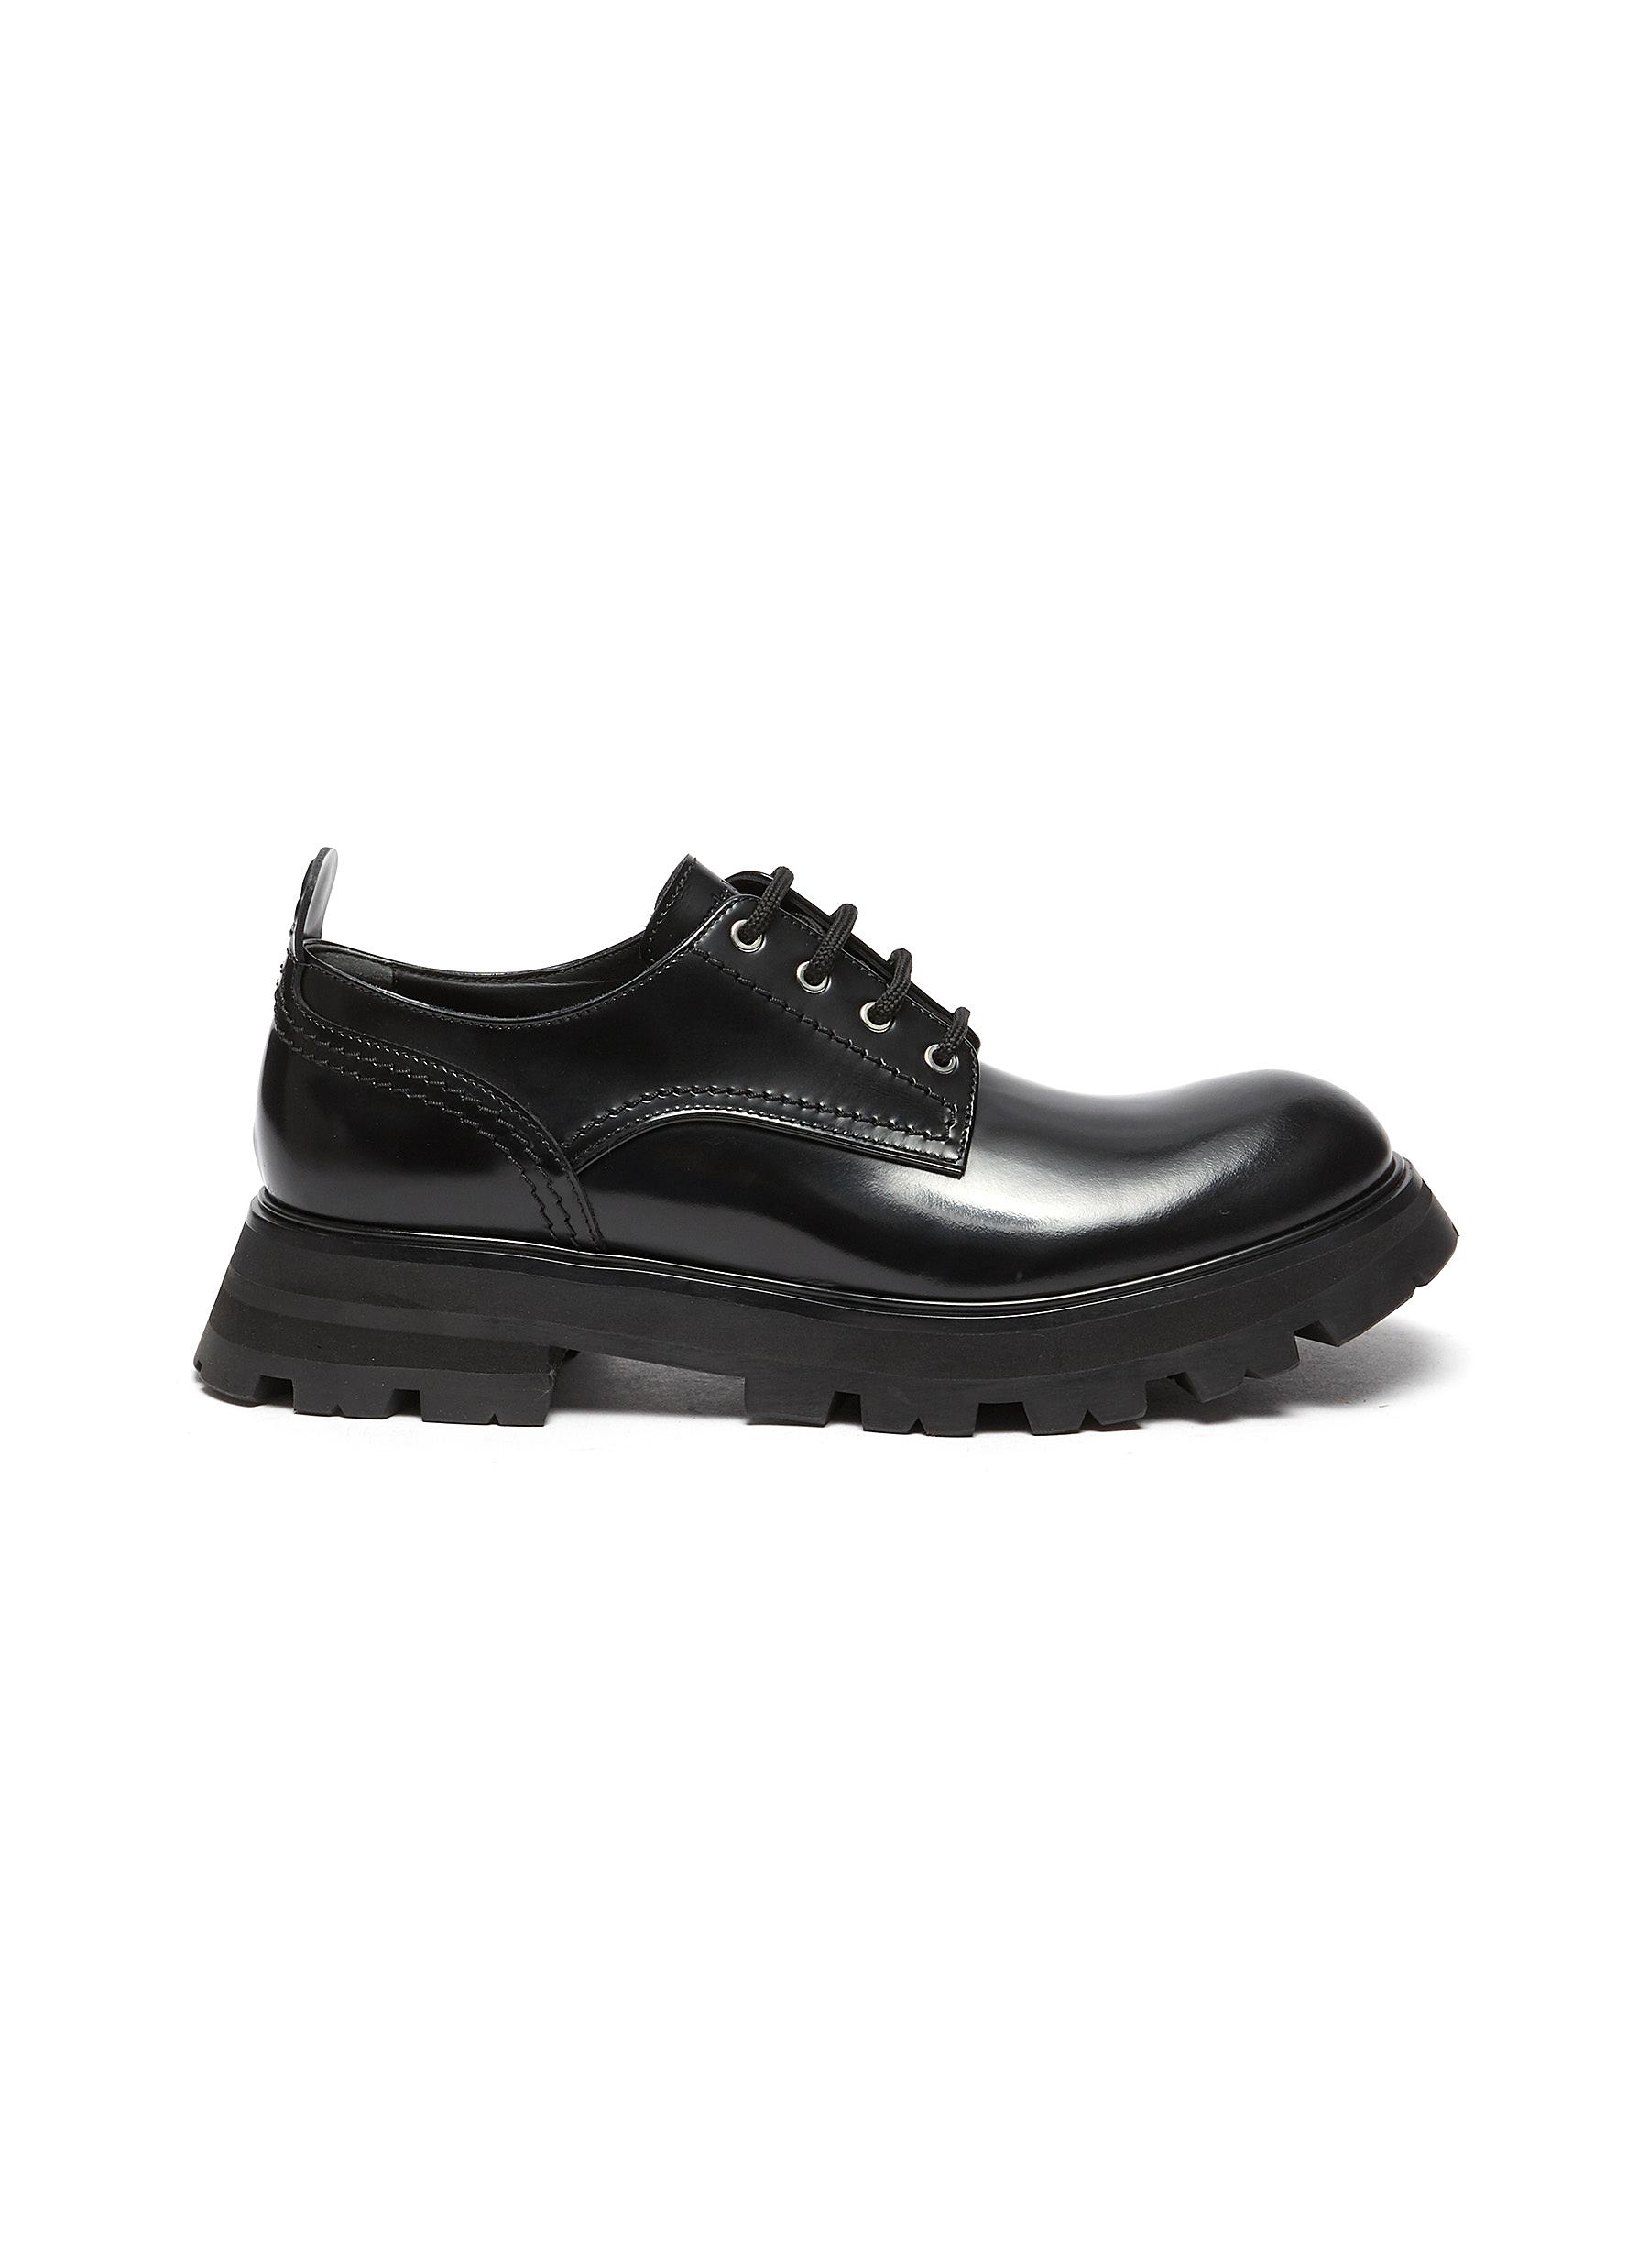 'Wonder' Curved Toe Tread Sole Leather Oxford Shoes